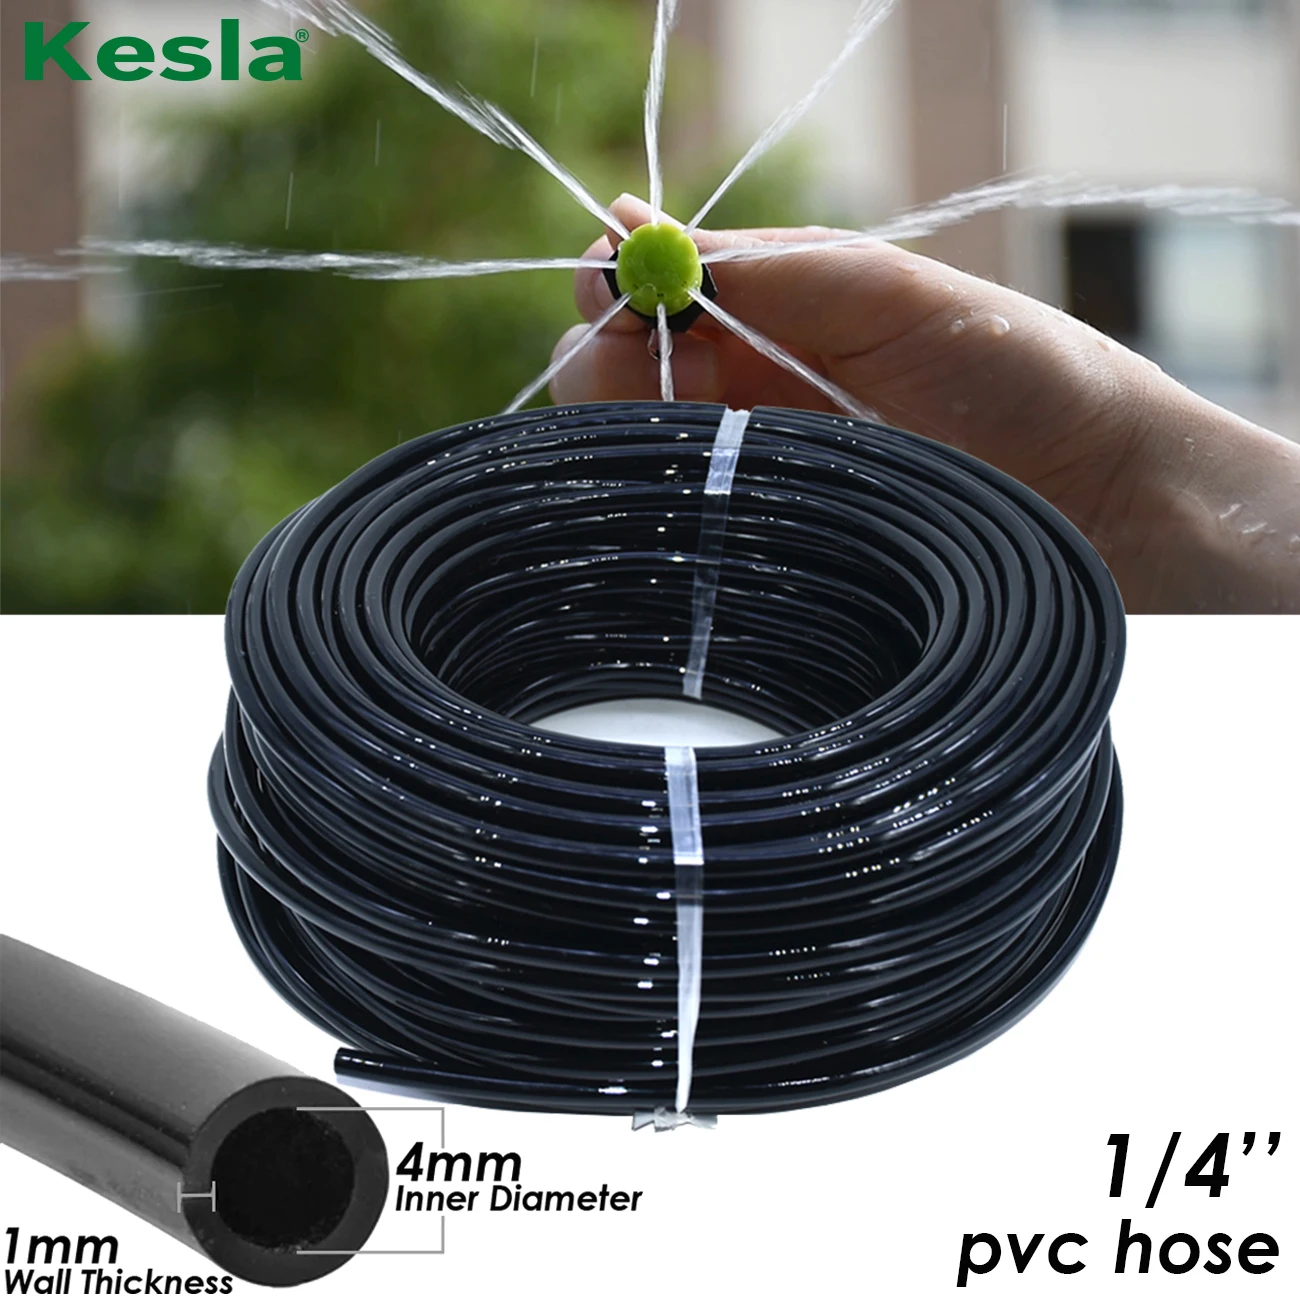 

KESLA 10m-30m Watering Hose 1/4'' Garden Drip Tubing Pipe 4/7mm PVC Hose Irrigation Systems Kits for Greenhouses Lawn Balcony